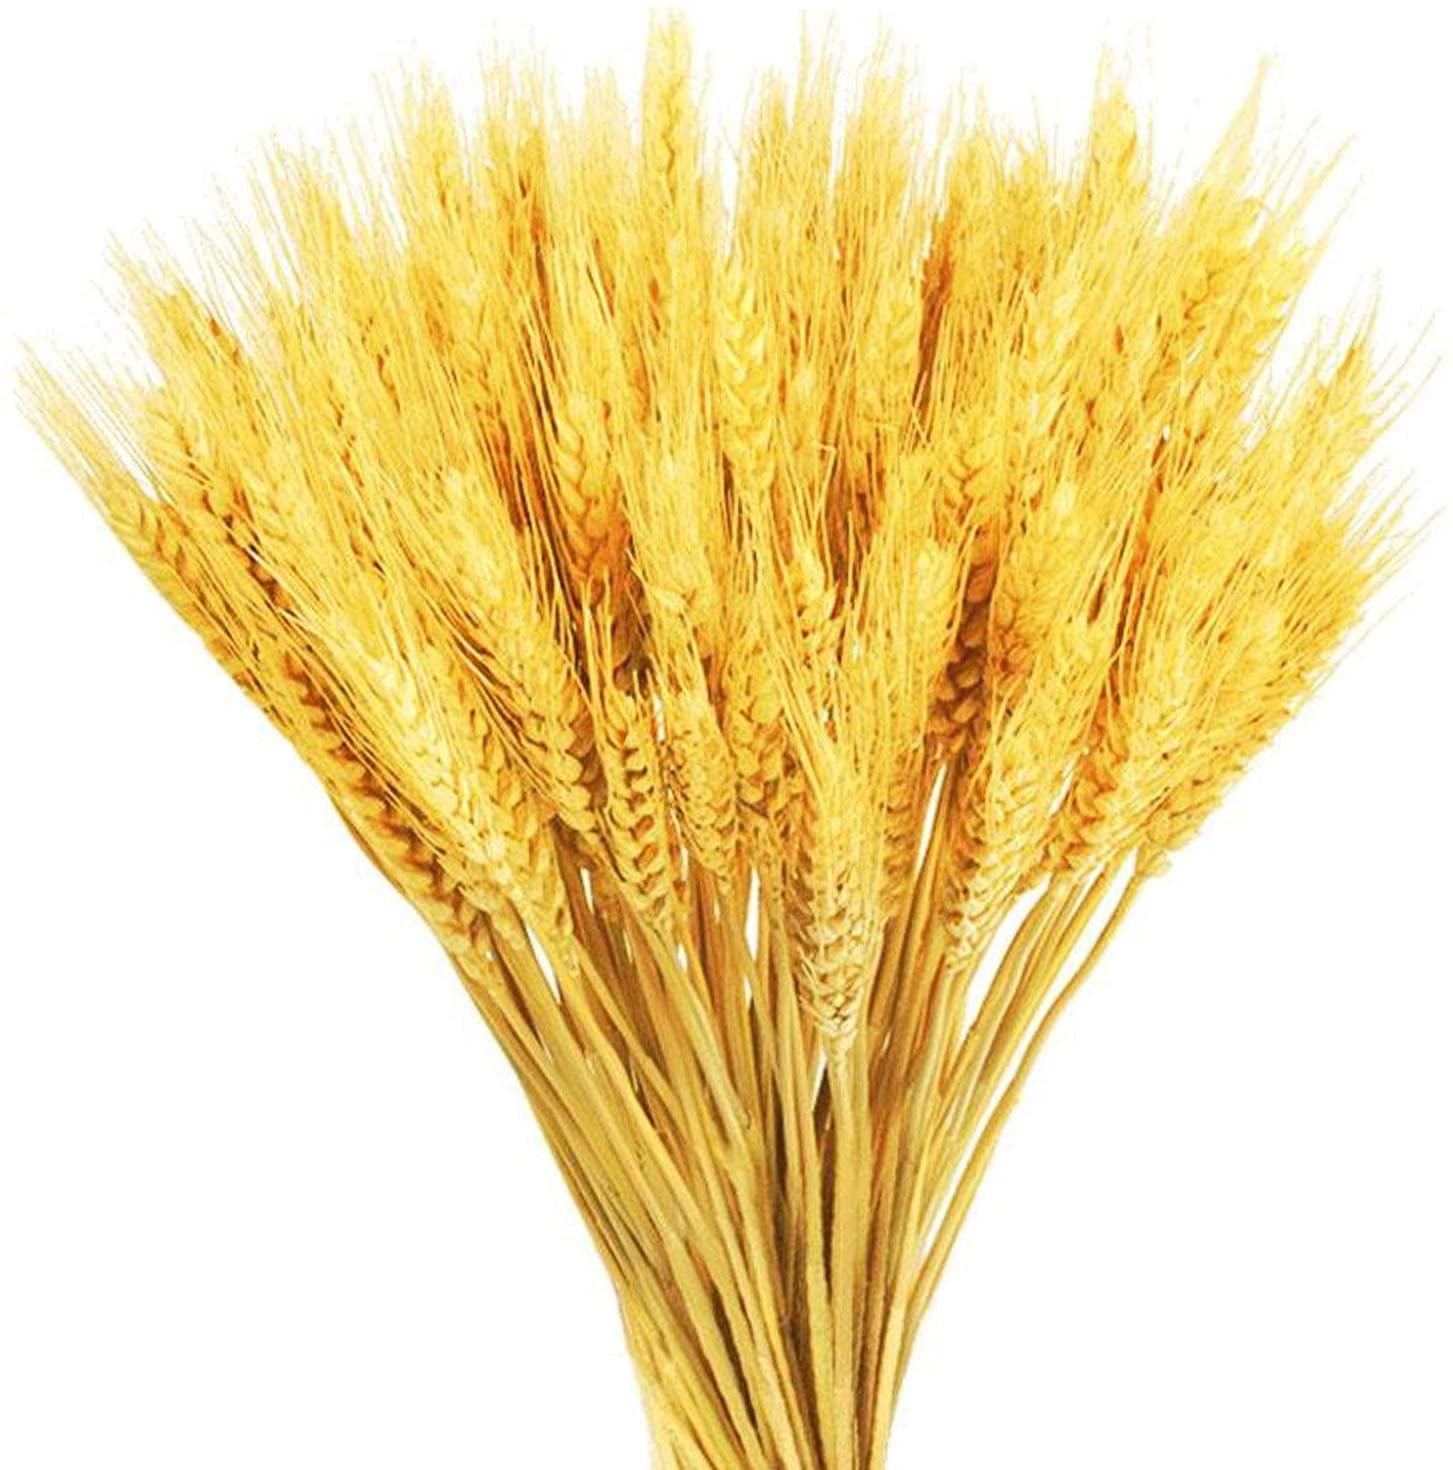 GTIDEA 100 Stems Dried Wheat Stalks Golden Natural Wheat Ears Flowers Fall Wedding Flower Bouquet for Home Farmhouse Party Decor 16.9 Inch